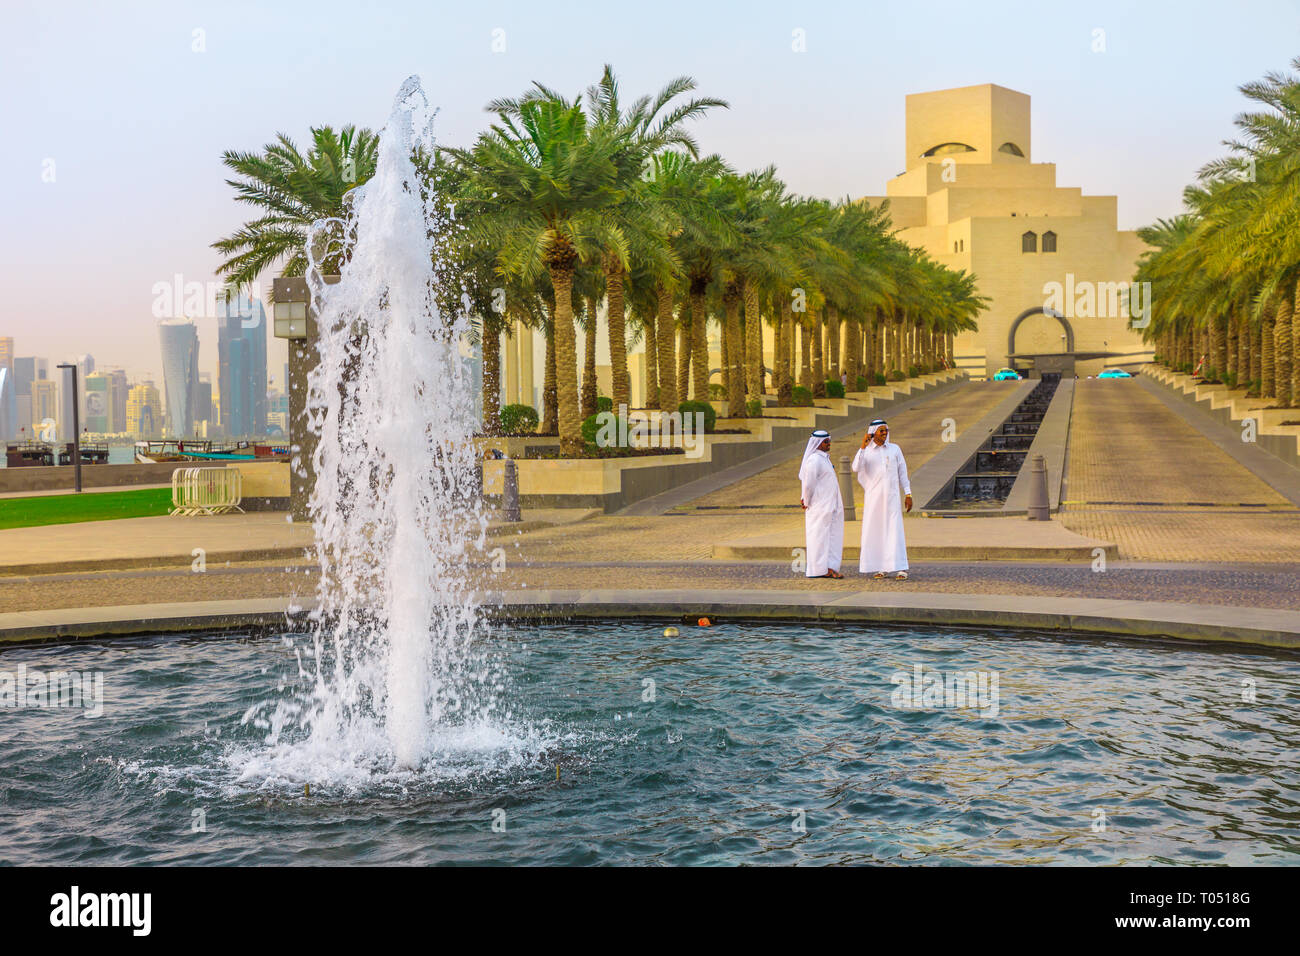 Doha, Qatar - February 16, 2019: two Arabs standing near fountain of Museum of Islamic Art with skyscrapers of West Bay skyline on background. Middle Stock Photo